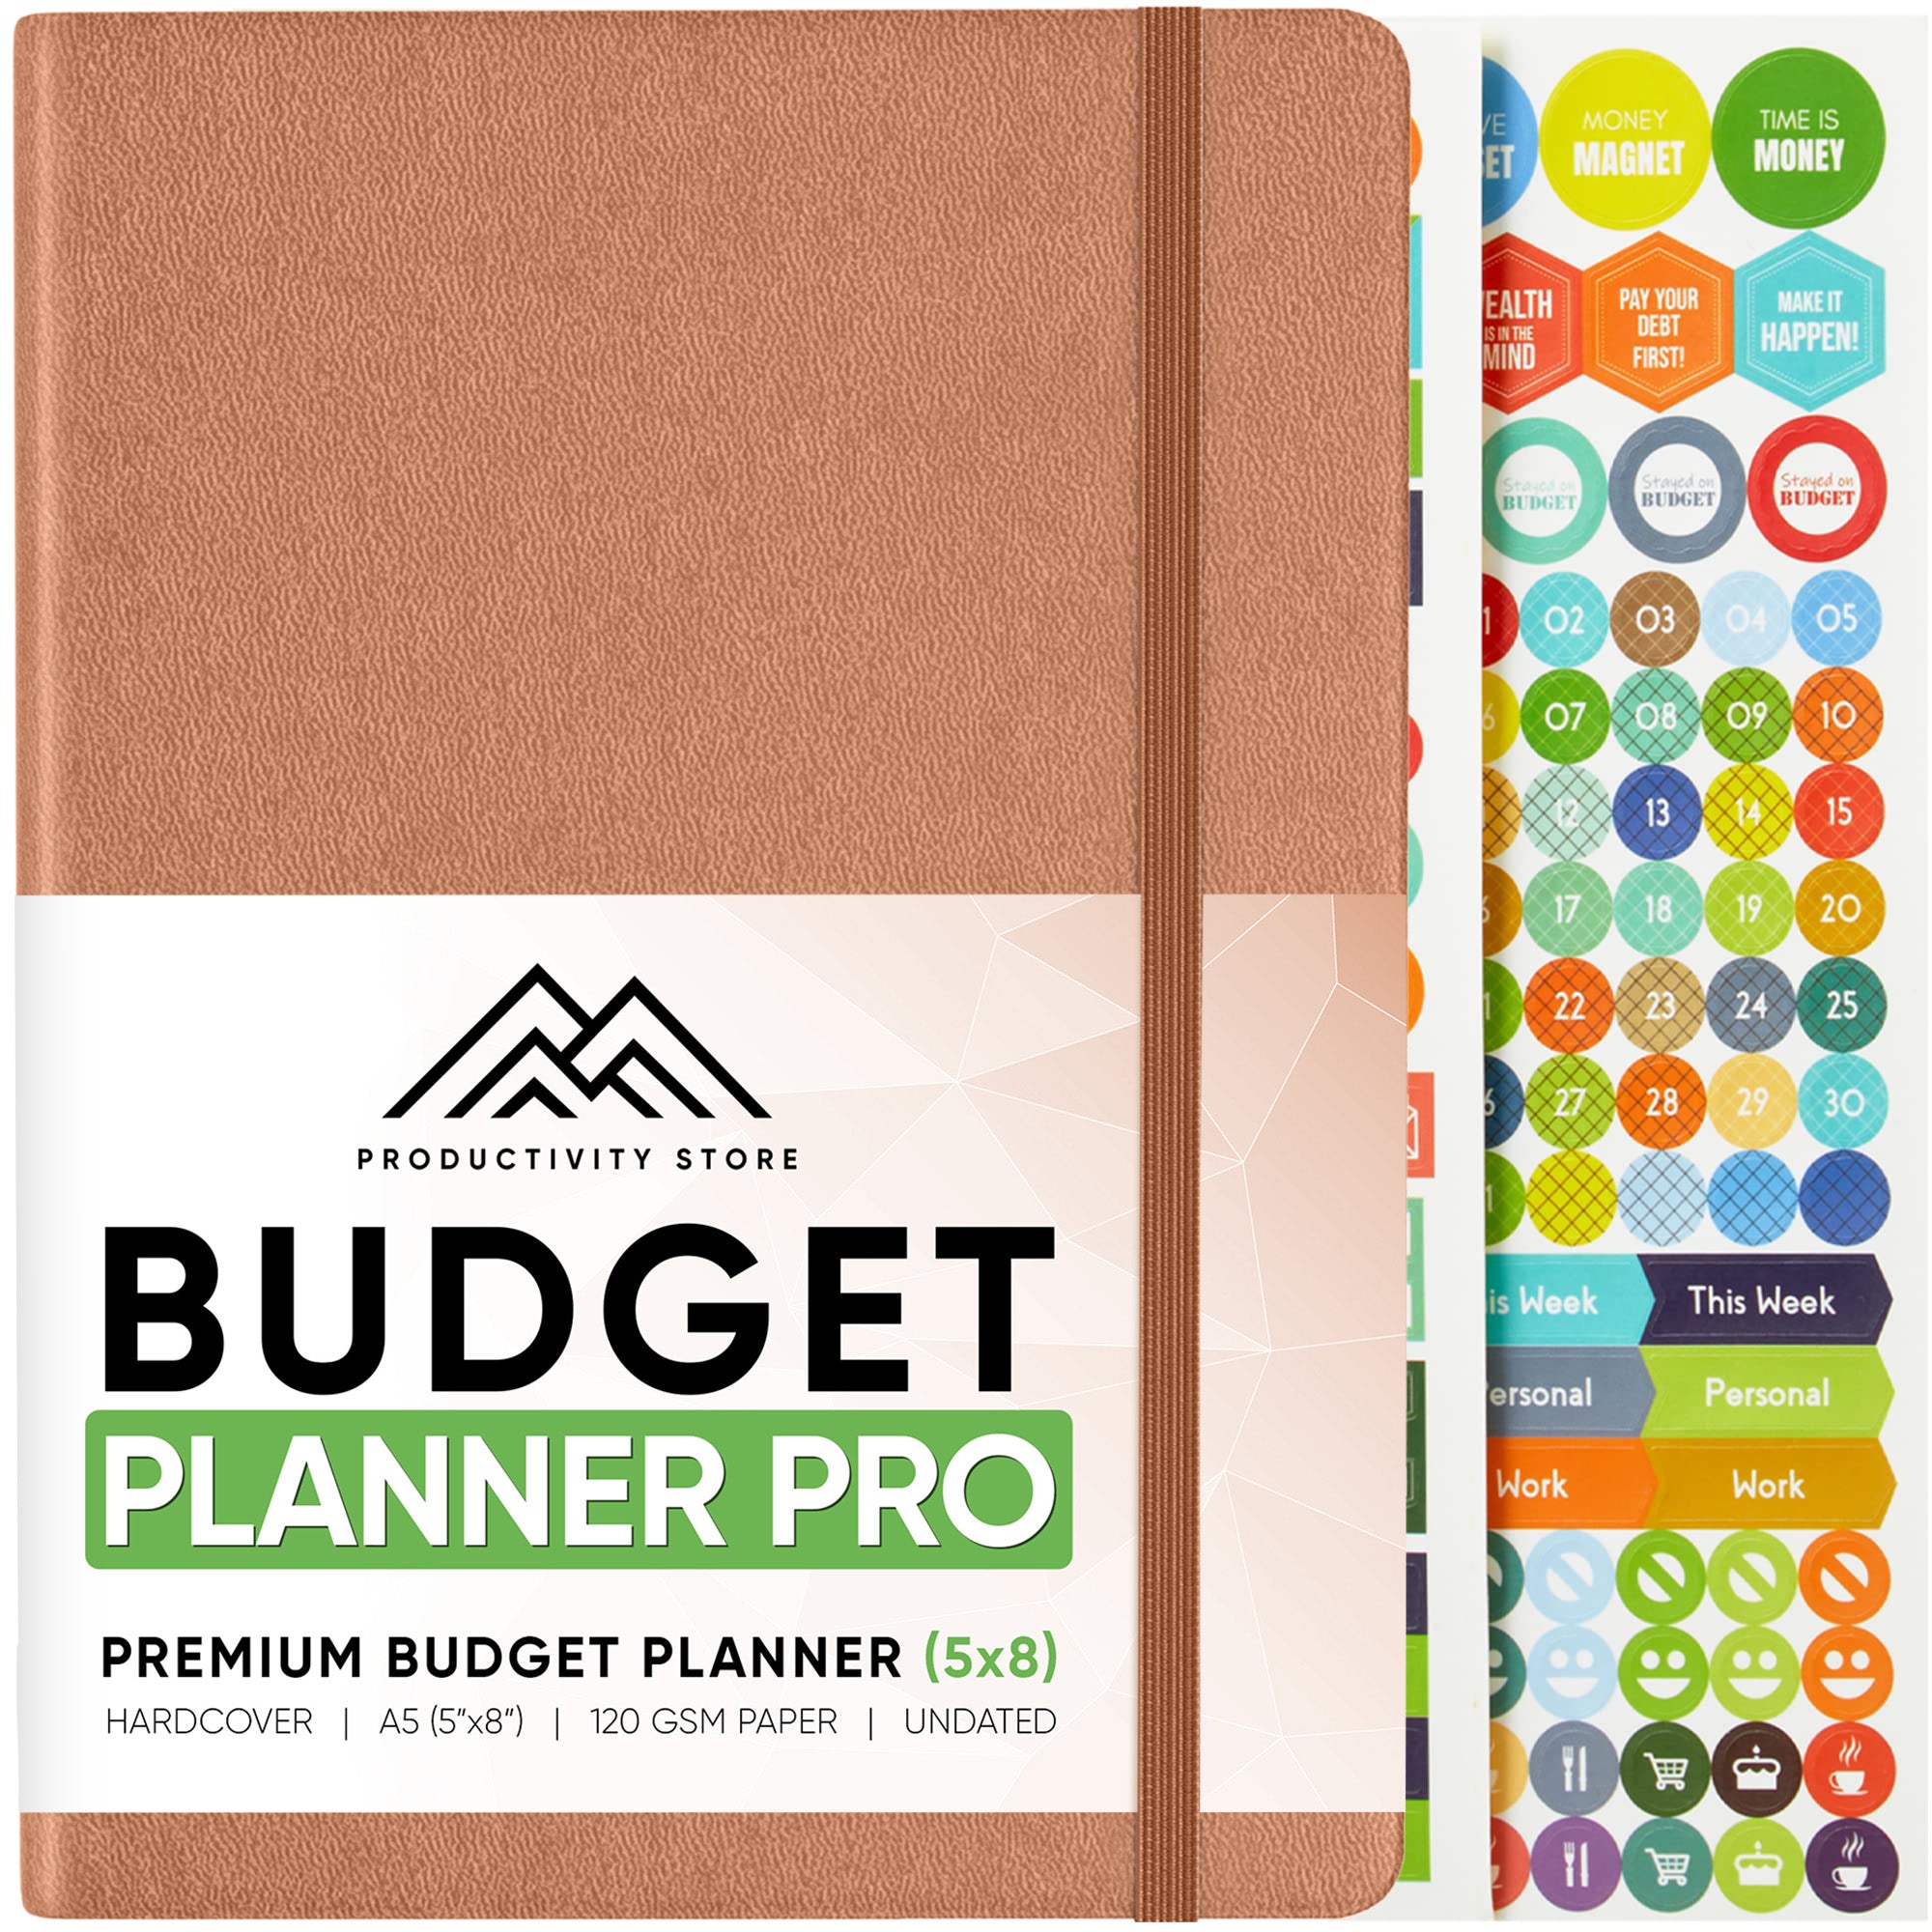 Budget Planner - Monthly Budget Book 2024 with Expense & Bill Tracker -  Undated 12 Month Financial Planner/Account Book to Take Control of Your  Money